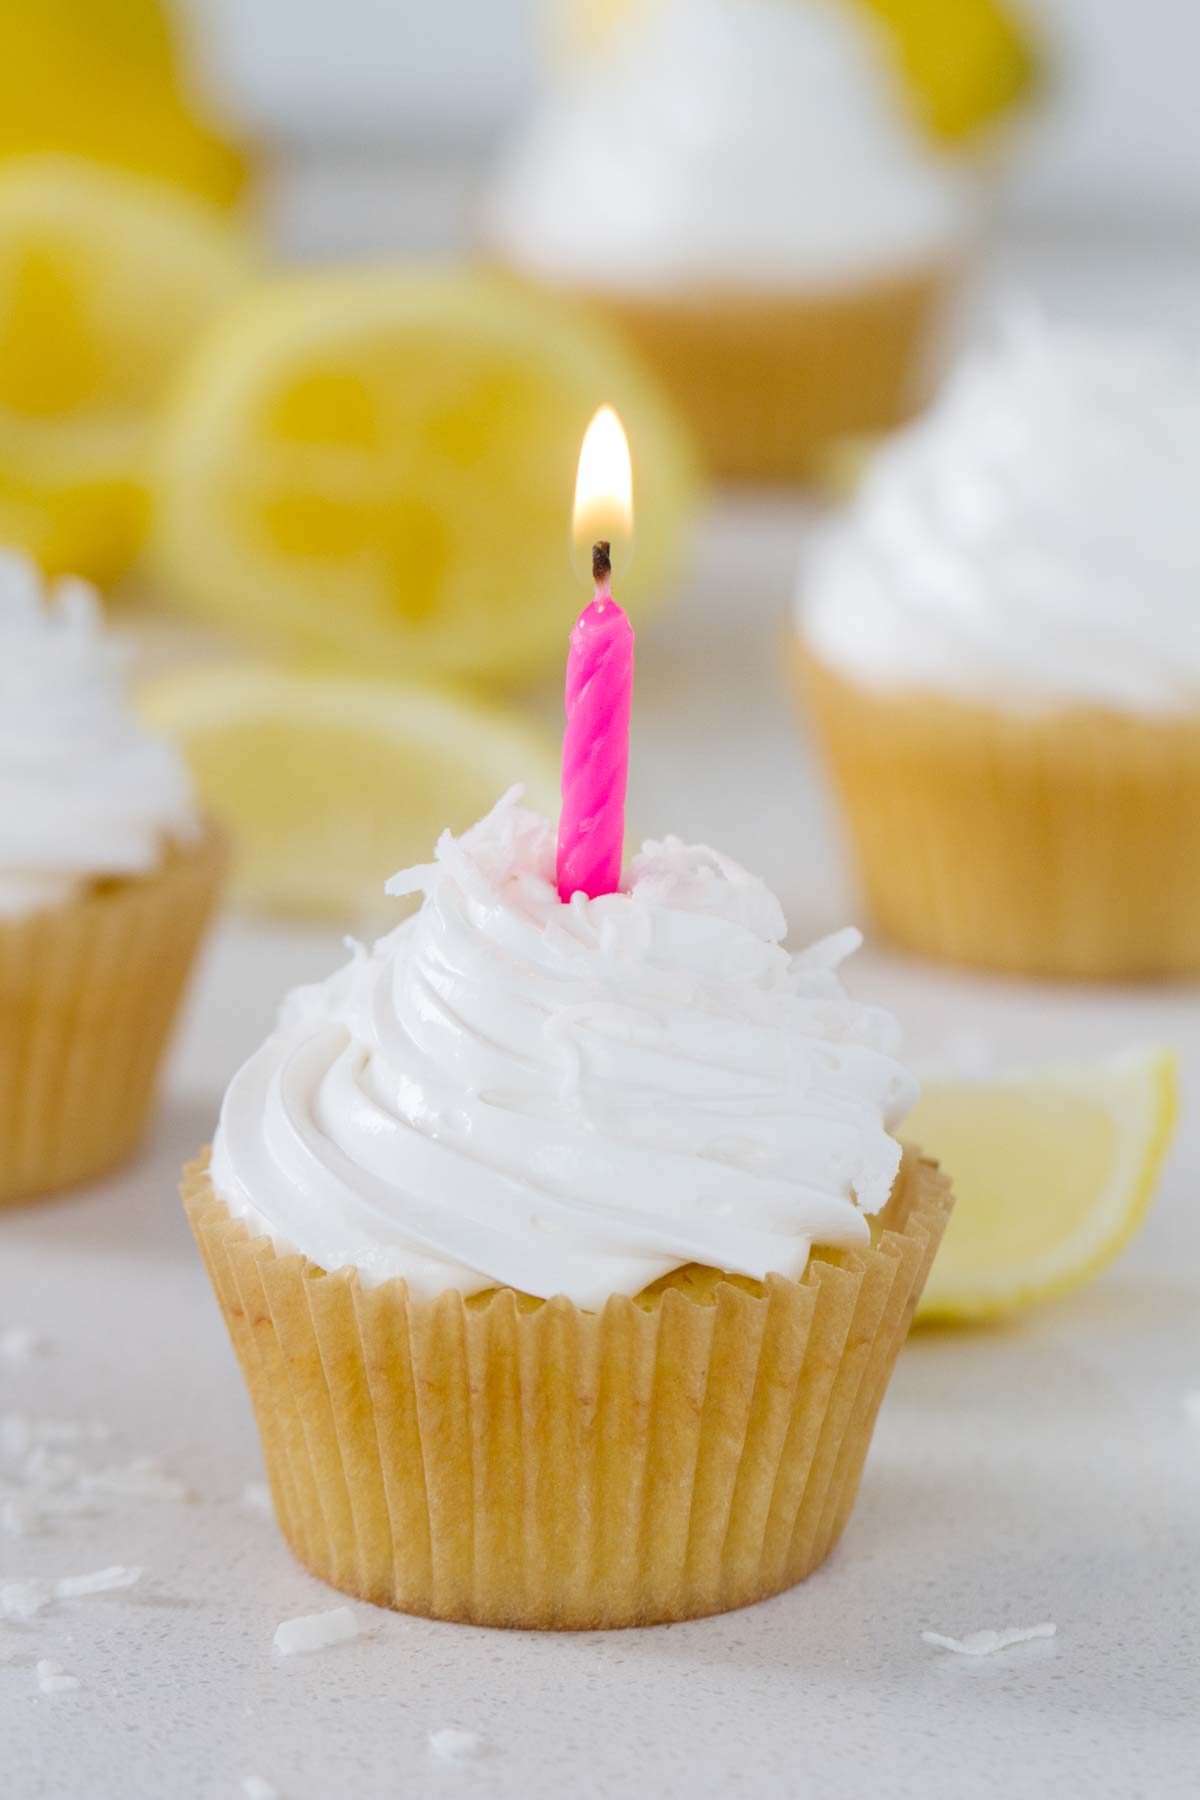 Lemon Sunshine Cupcake with a candle in it.